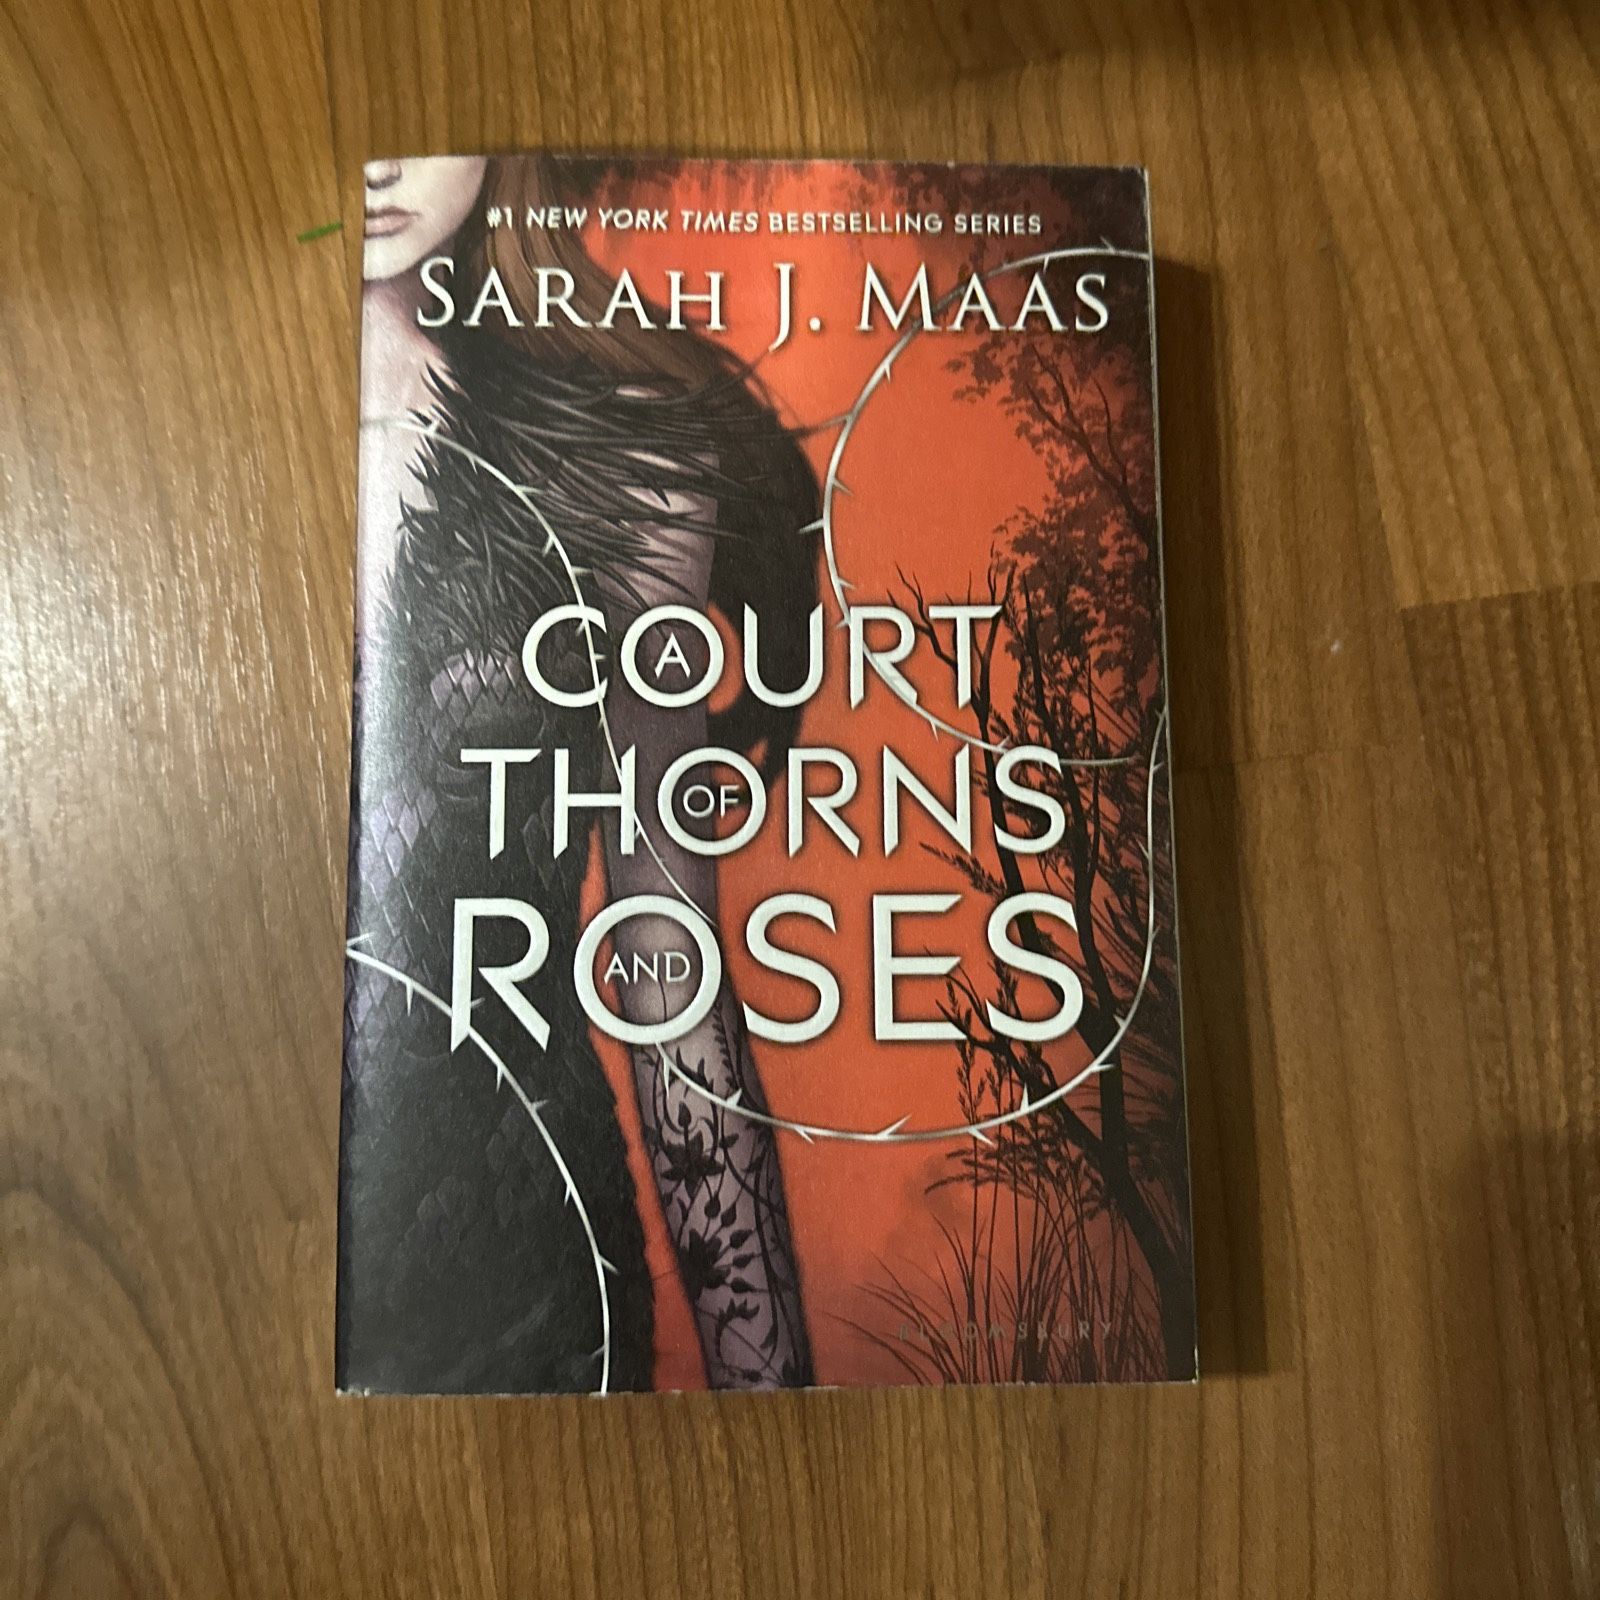 A Court Of Thorns And Roses. Original Cover. Collectible 